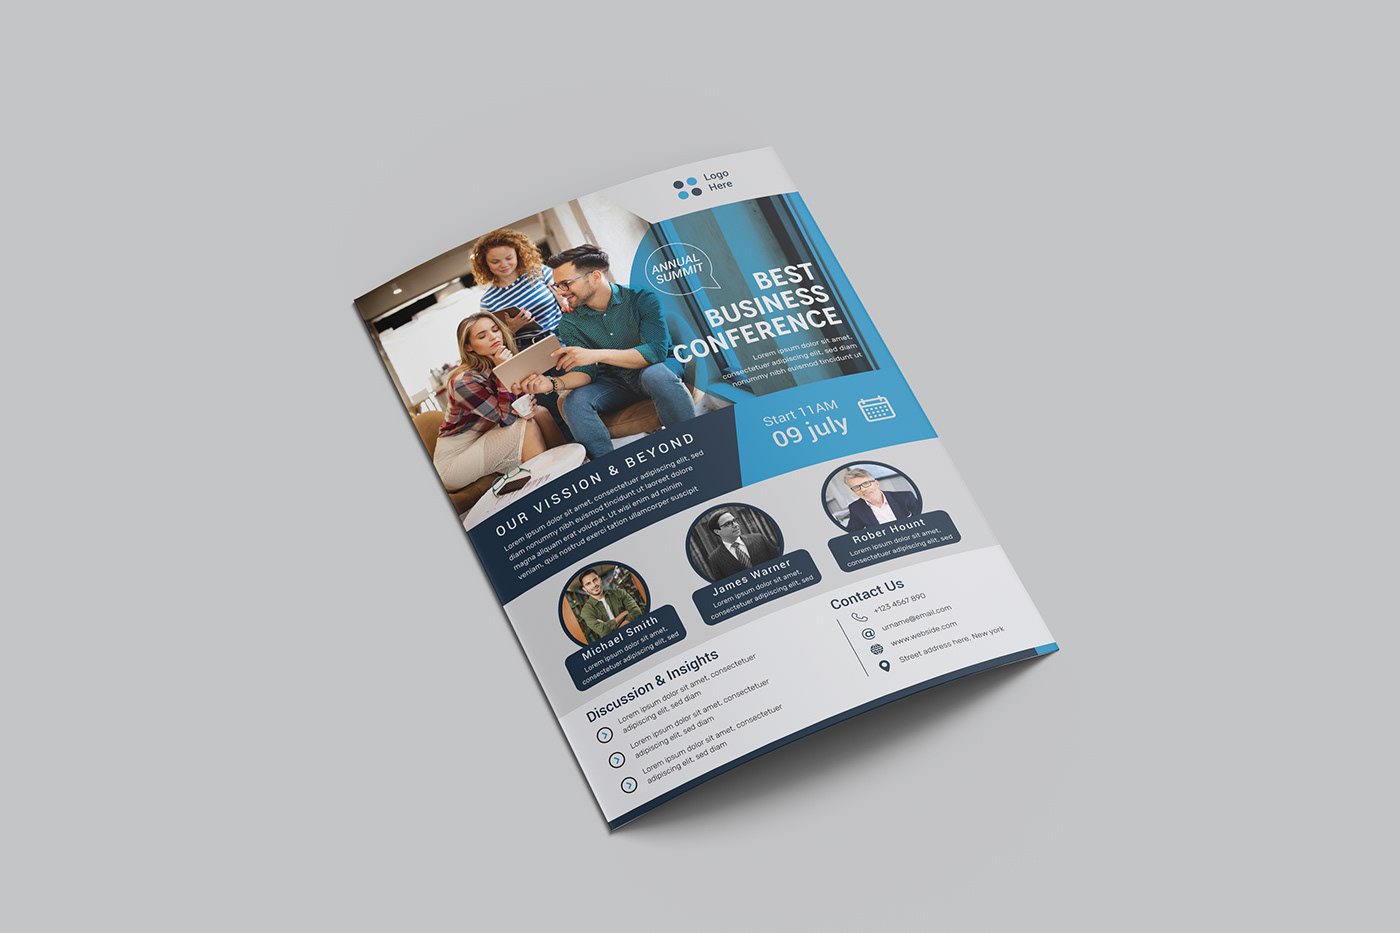 brochure business conference corporate flyer Flyer Design flyers meeting Promotion template